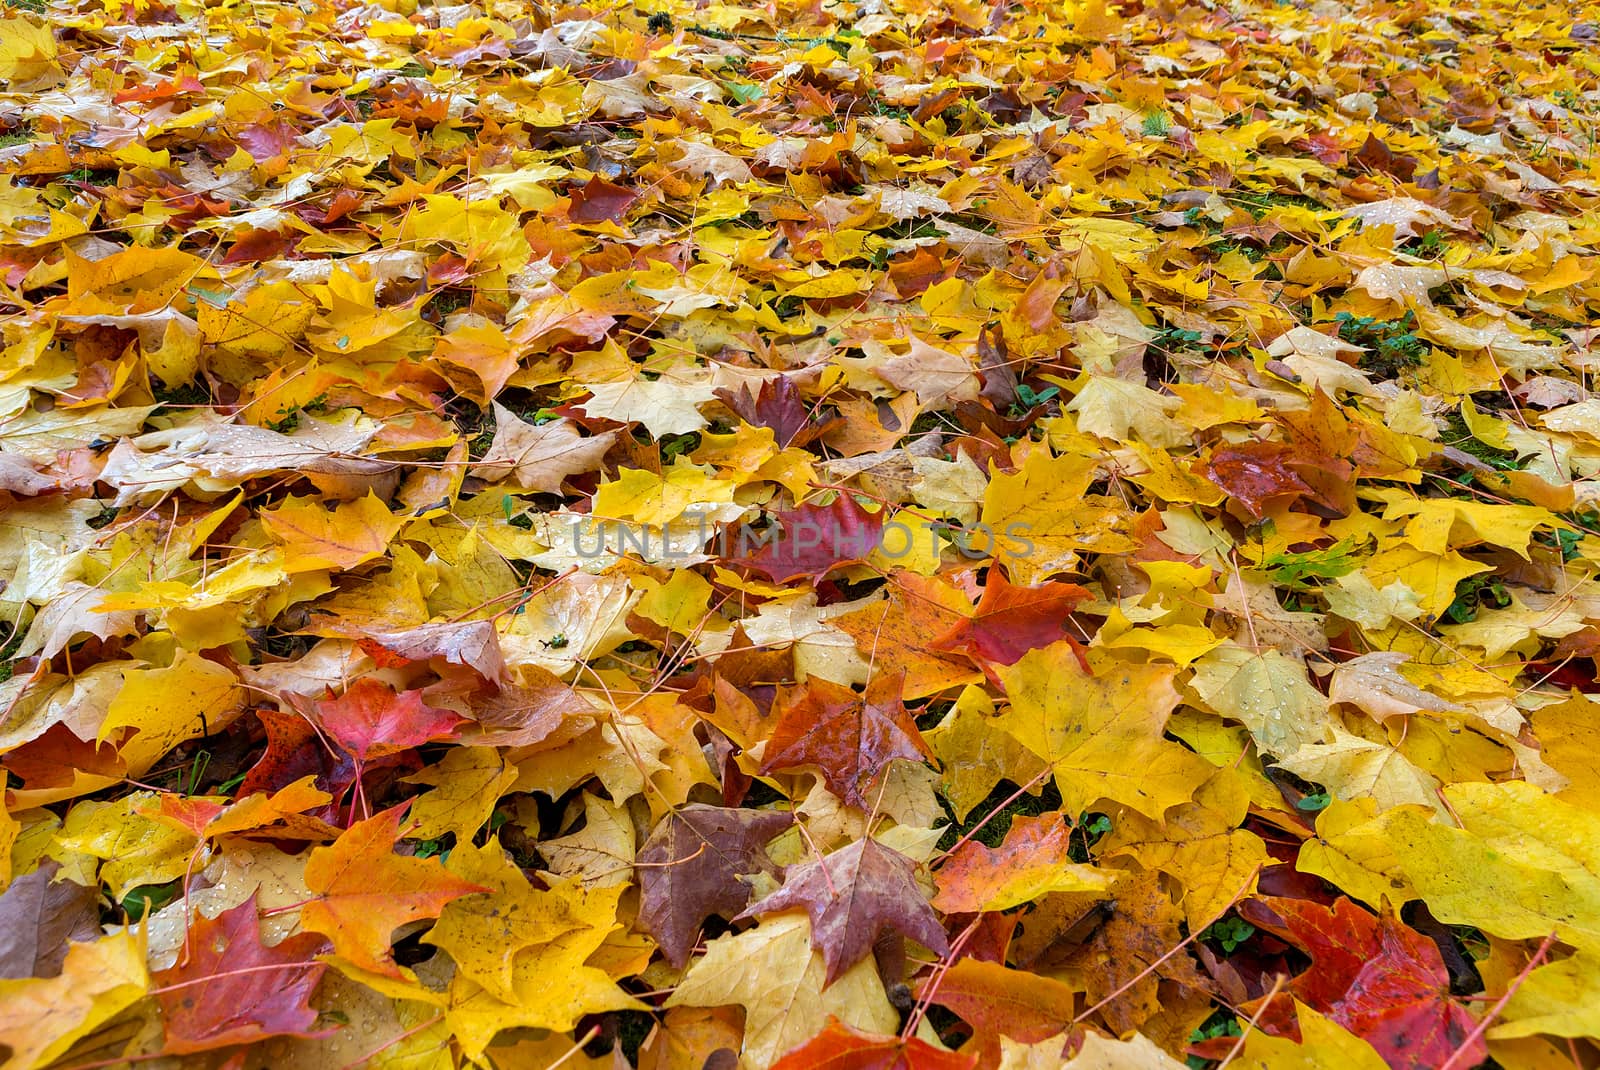 Fallen Fall Color Leaves on Parks Ground by jpldesigns